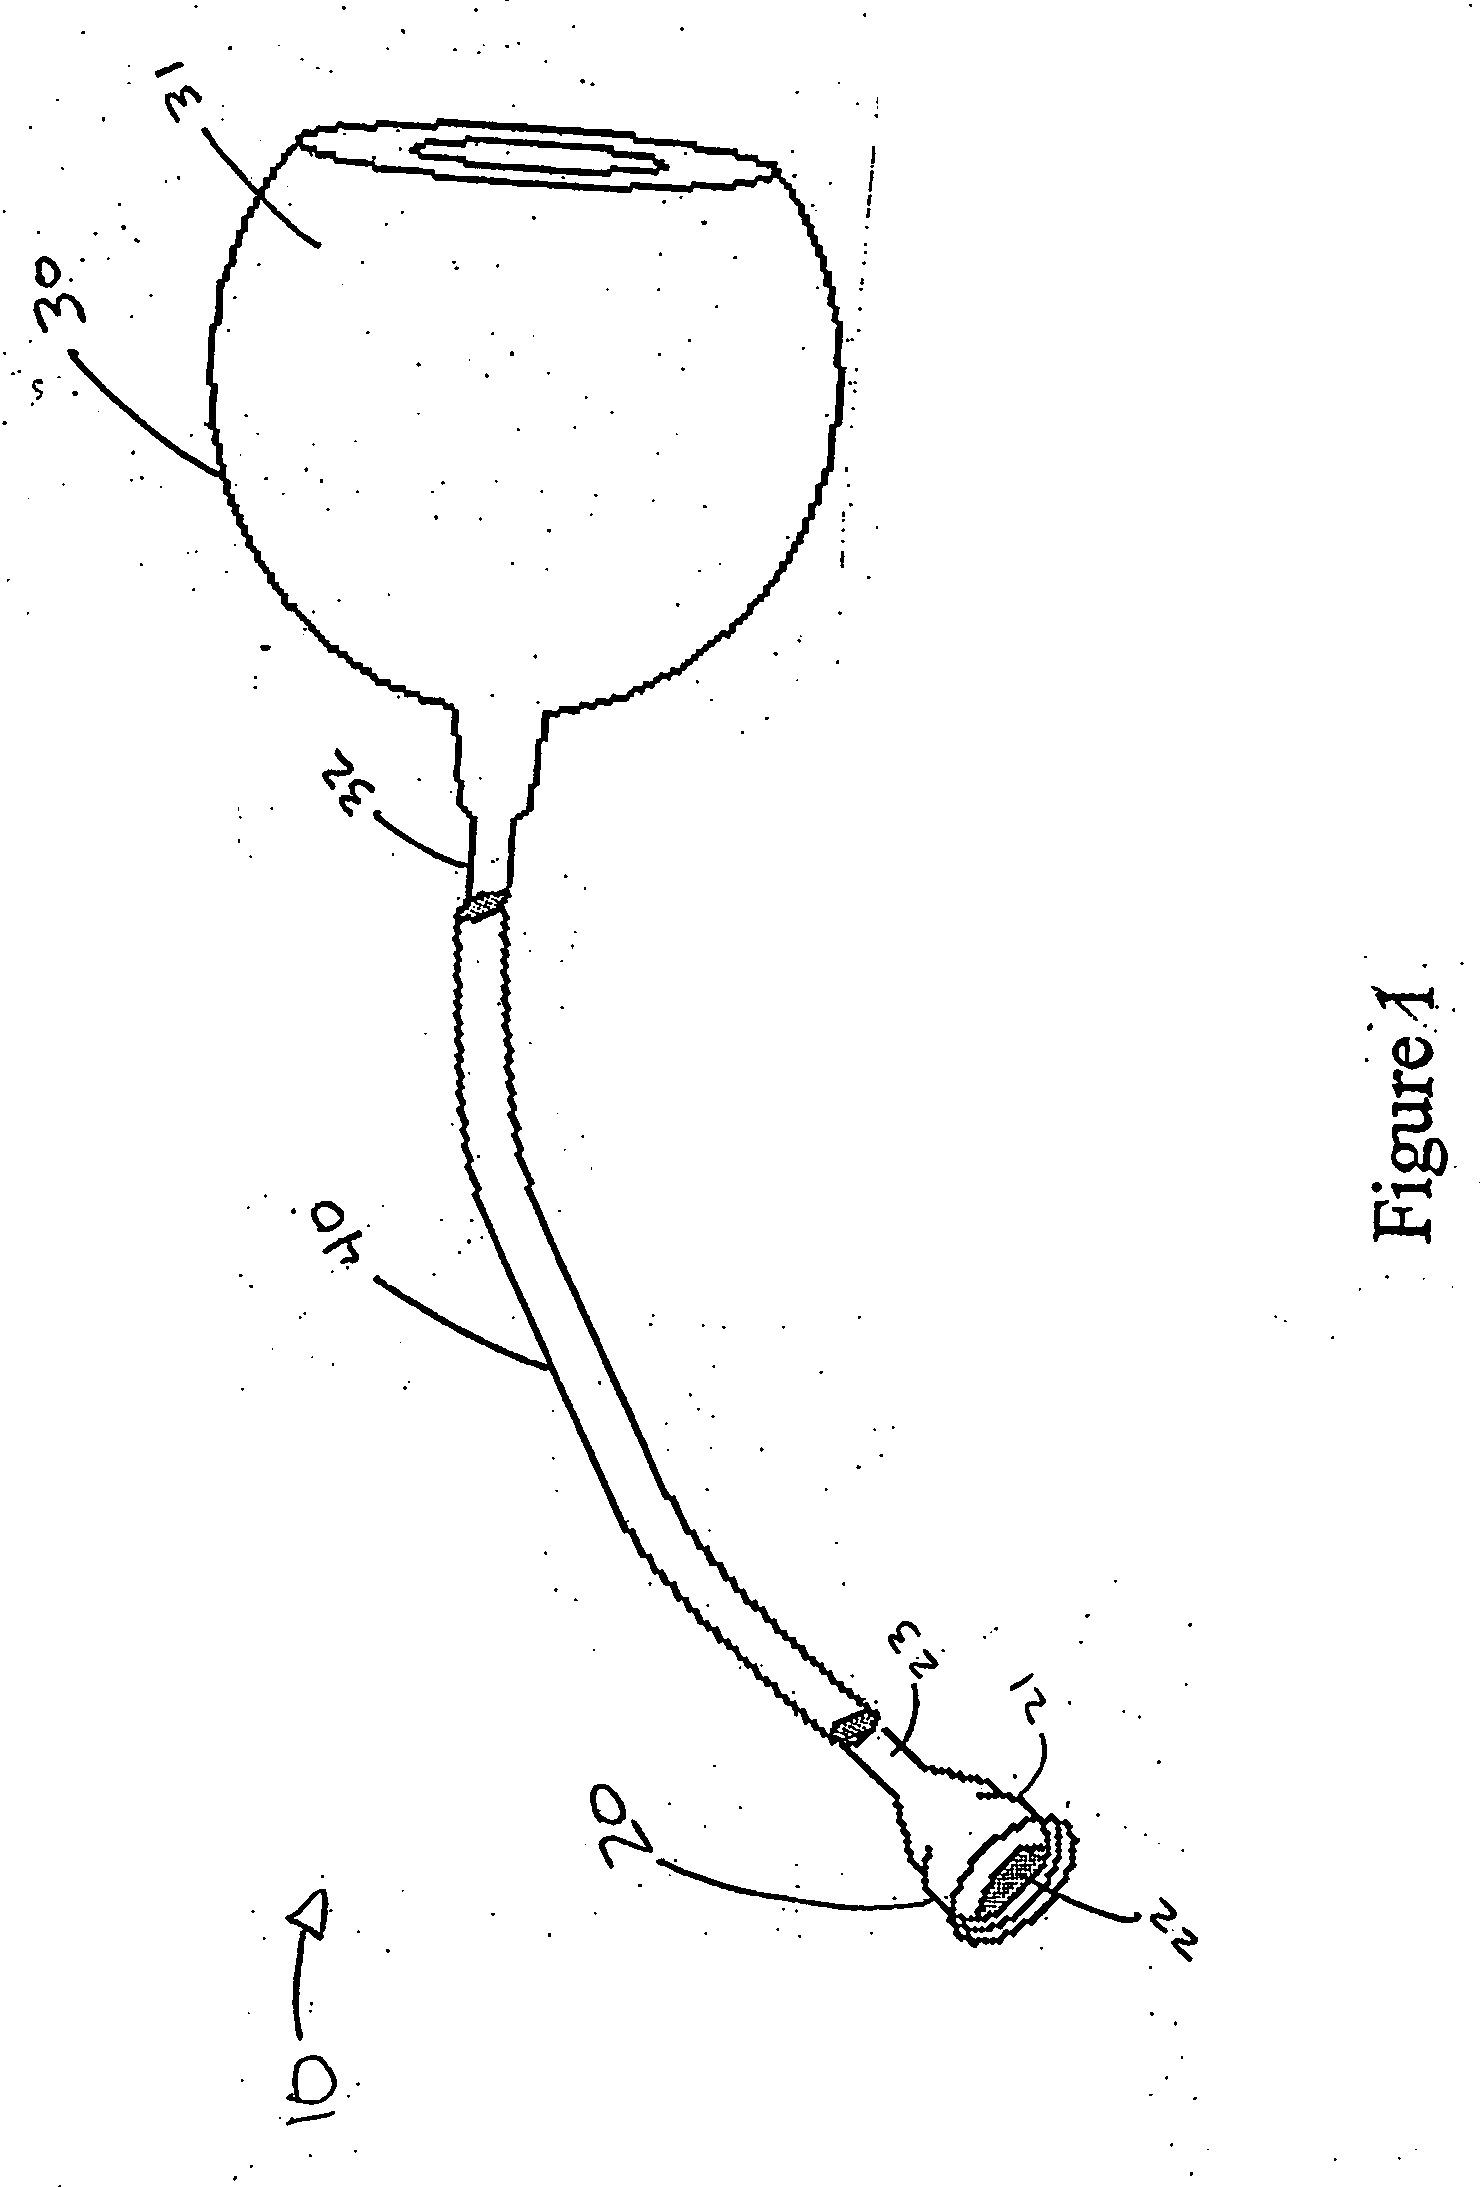 Vacuum apparatus and method for treating sores